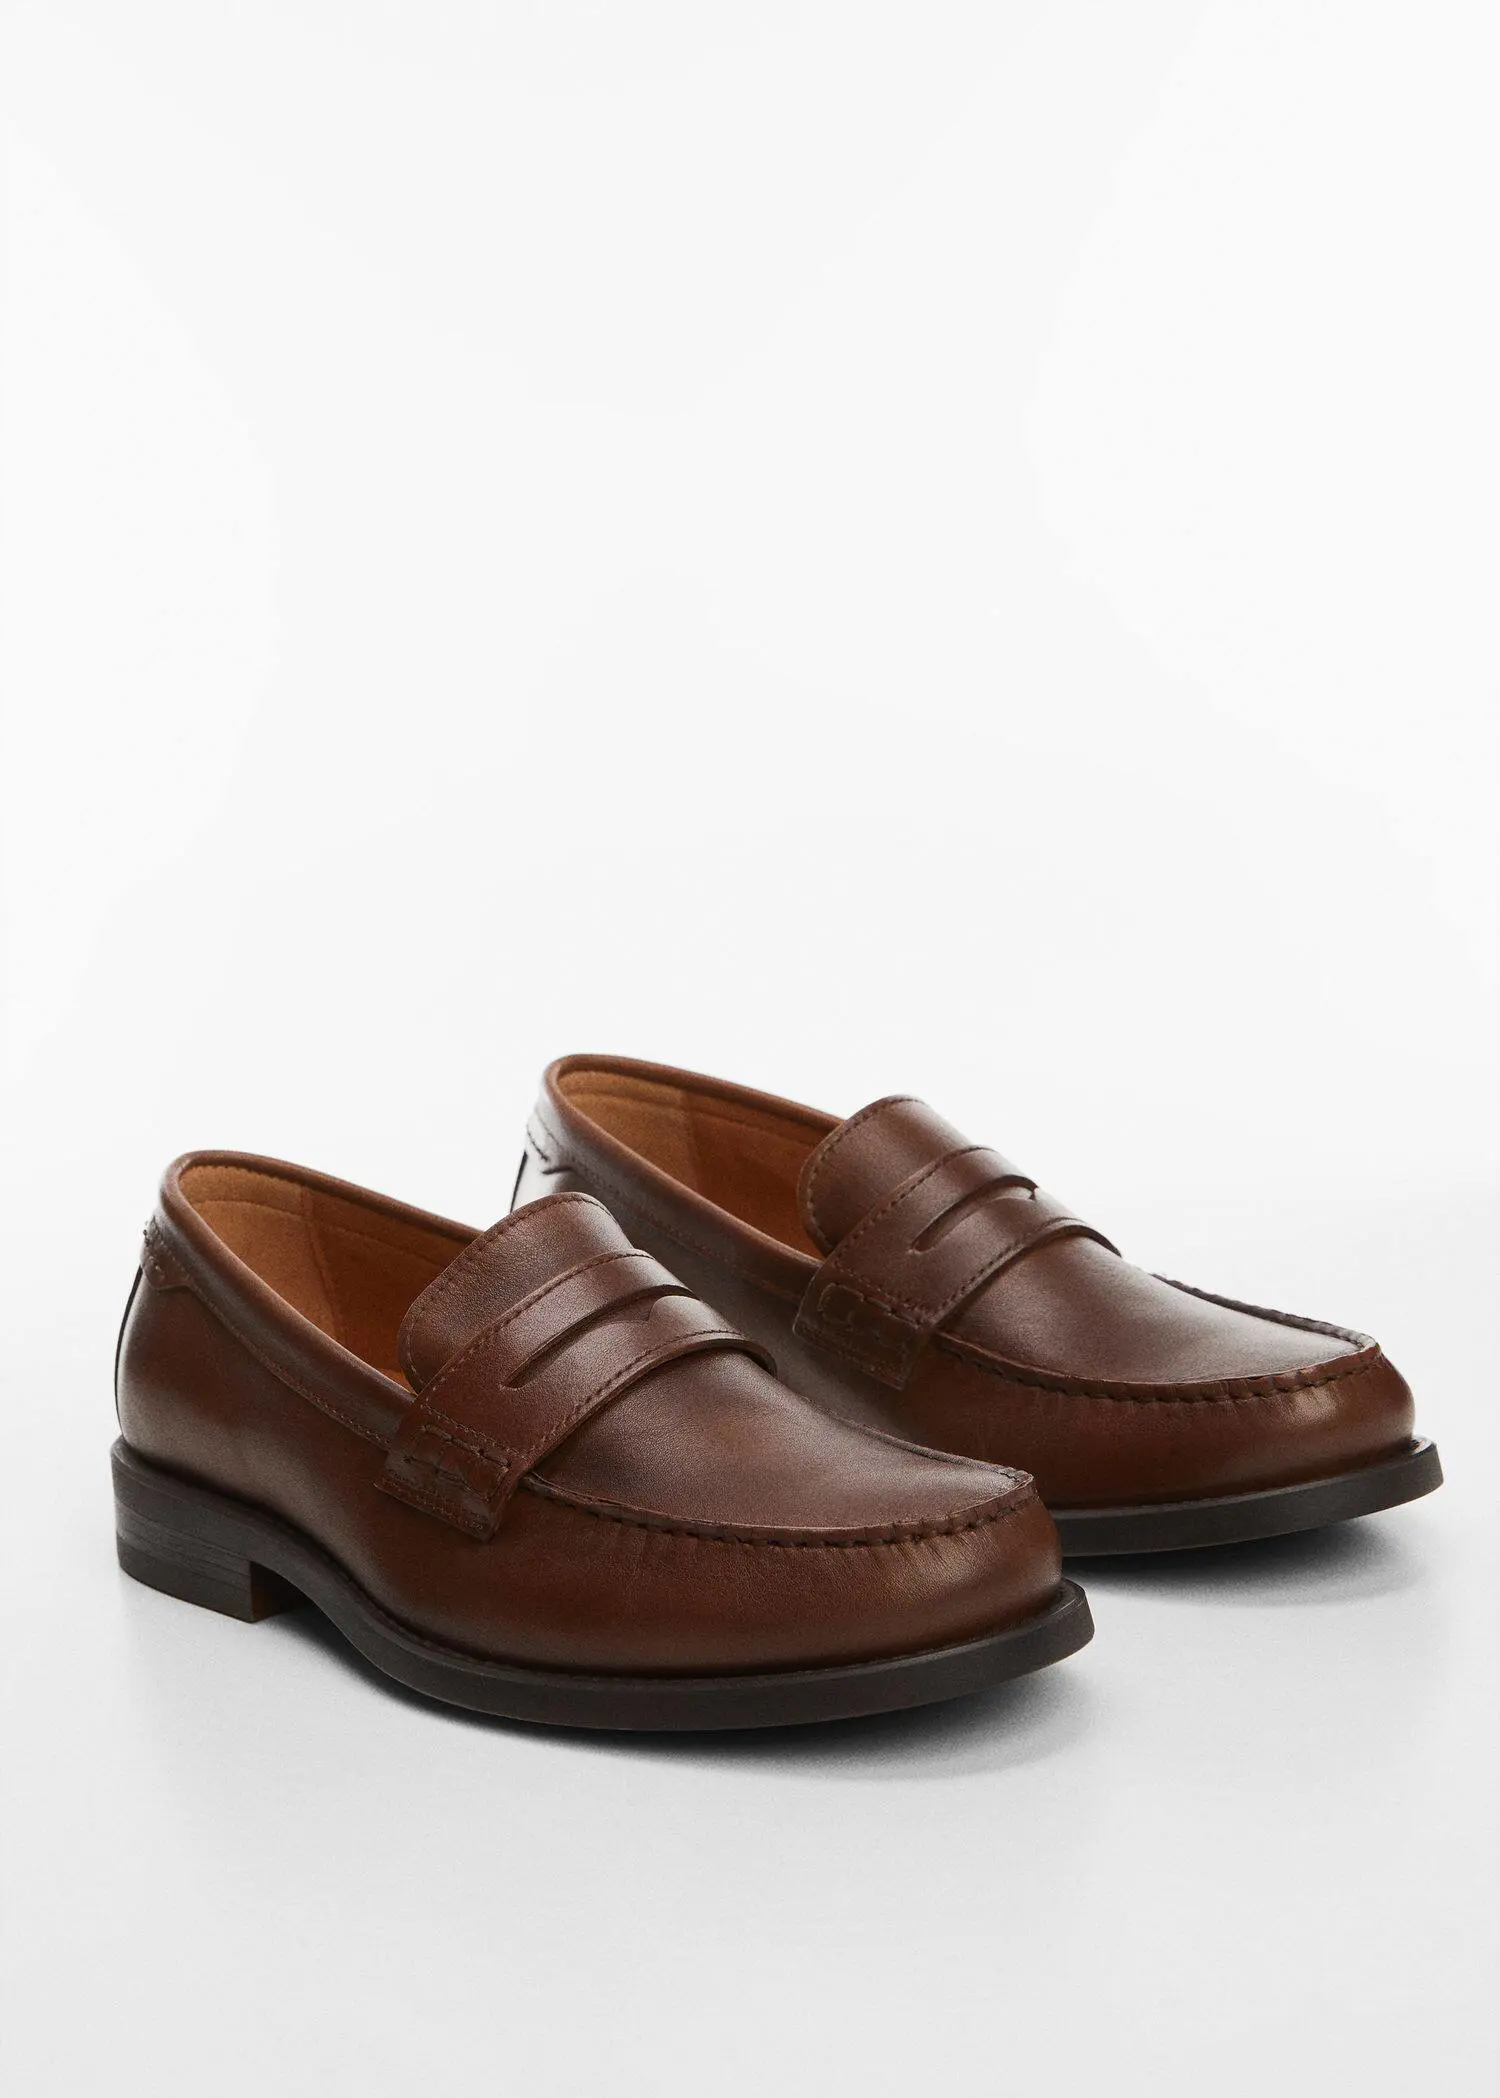 Mango Leather penny loafers. 2